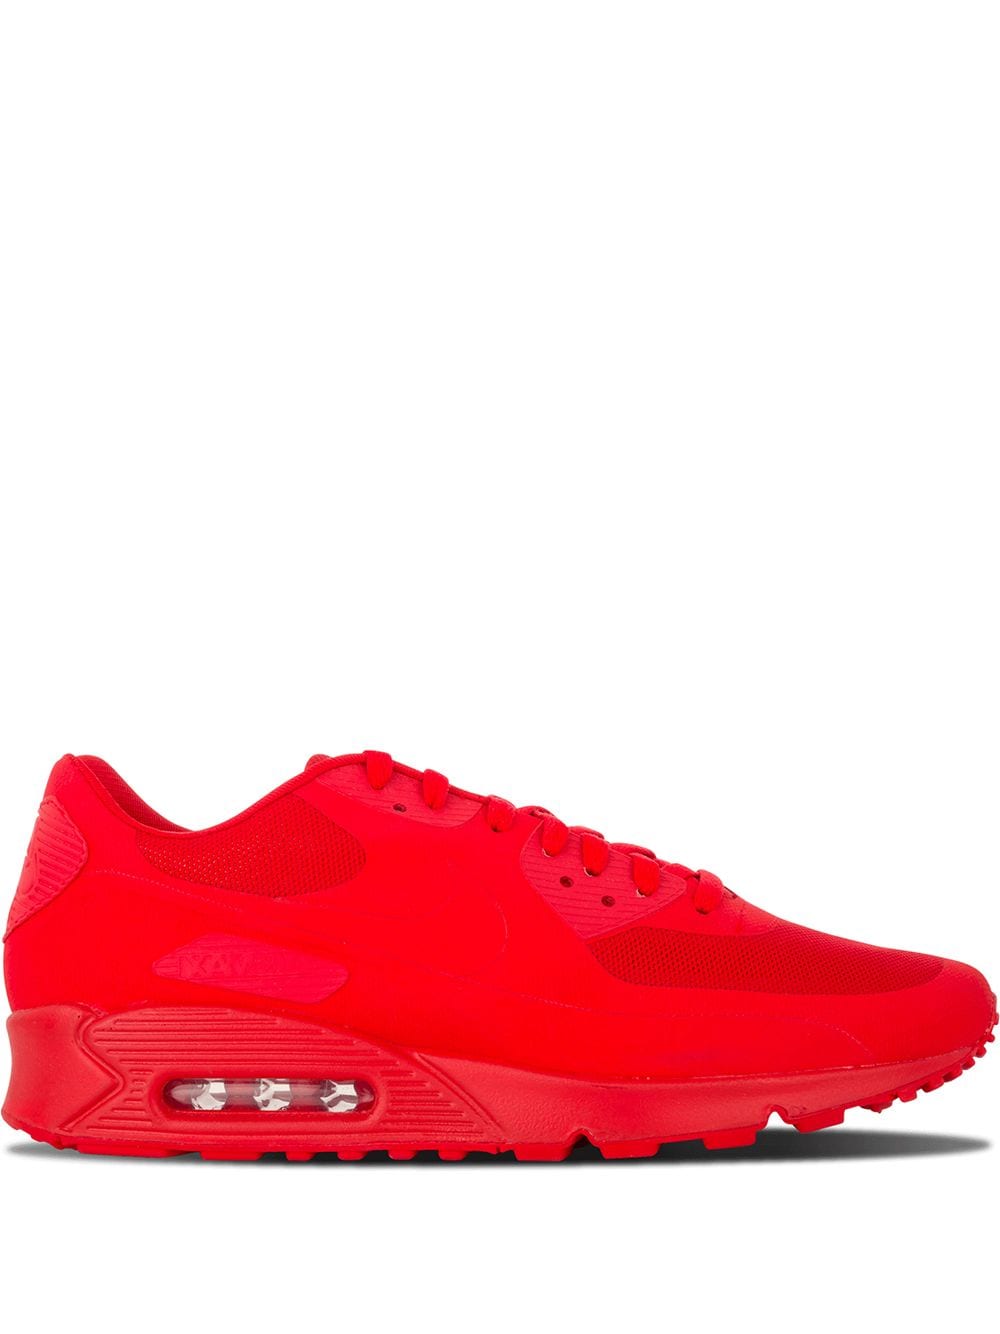 Nike Air Max 90 Hyperfuse QS "Independence Day" sneakers - Red von Nike